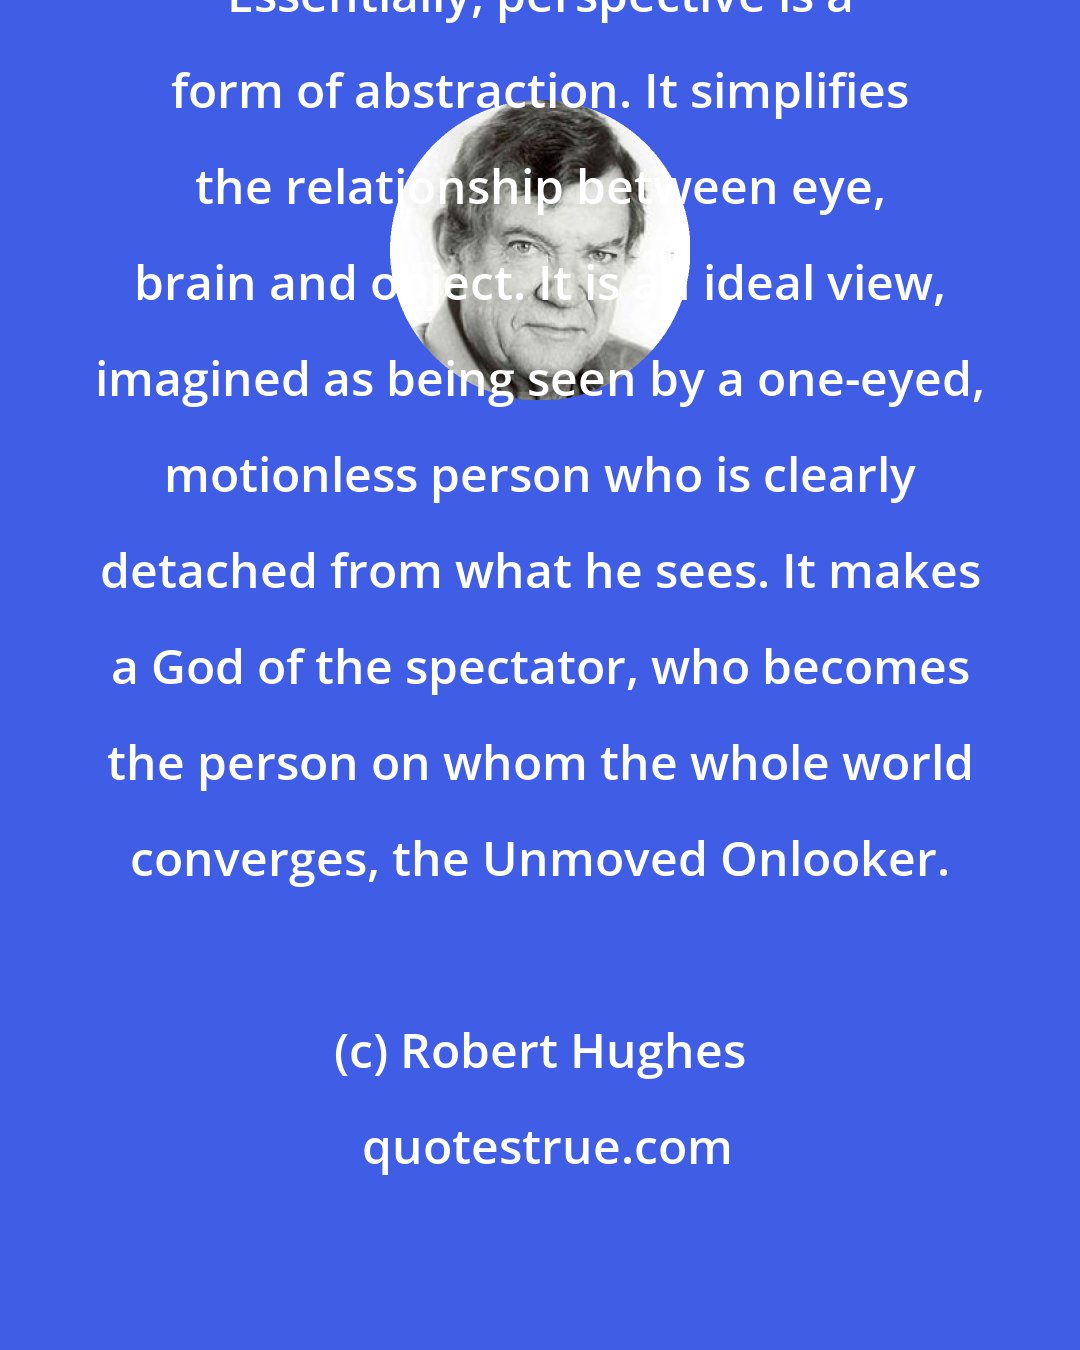 Robert Hughes: Essentially, perspective is a form of abstraction. It simplifies the relationship between eye, brain and object. It is an ideal view, imagined as being seen by a one-eyed, motionless person who is clearly detached from what he sees. It makes a God of the spectator, who becomes the person on whom the whole world converges, the Unmoved Onlooker.